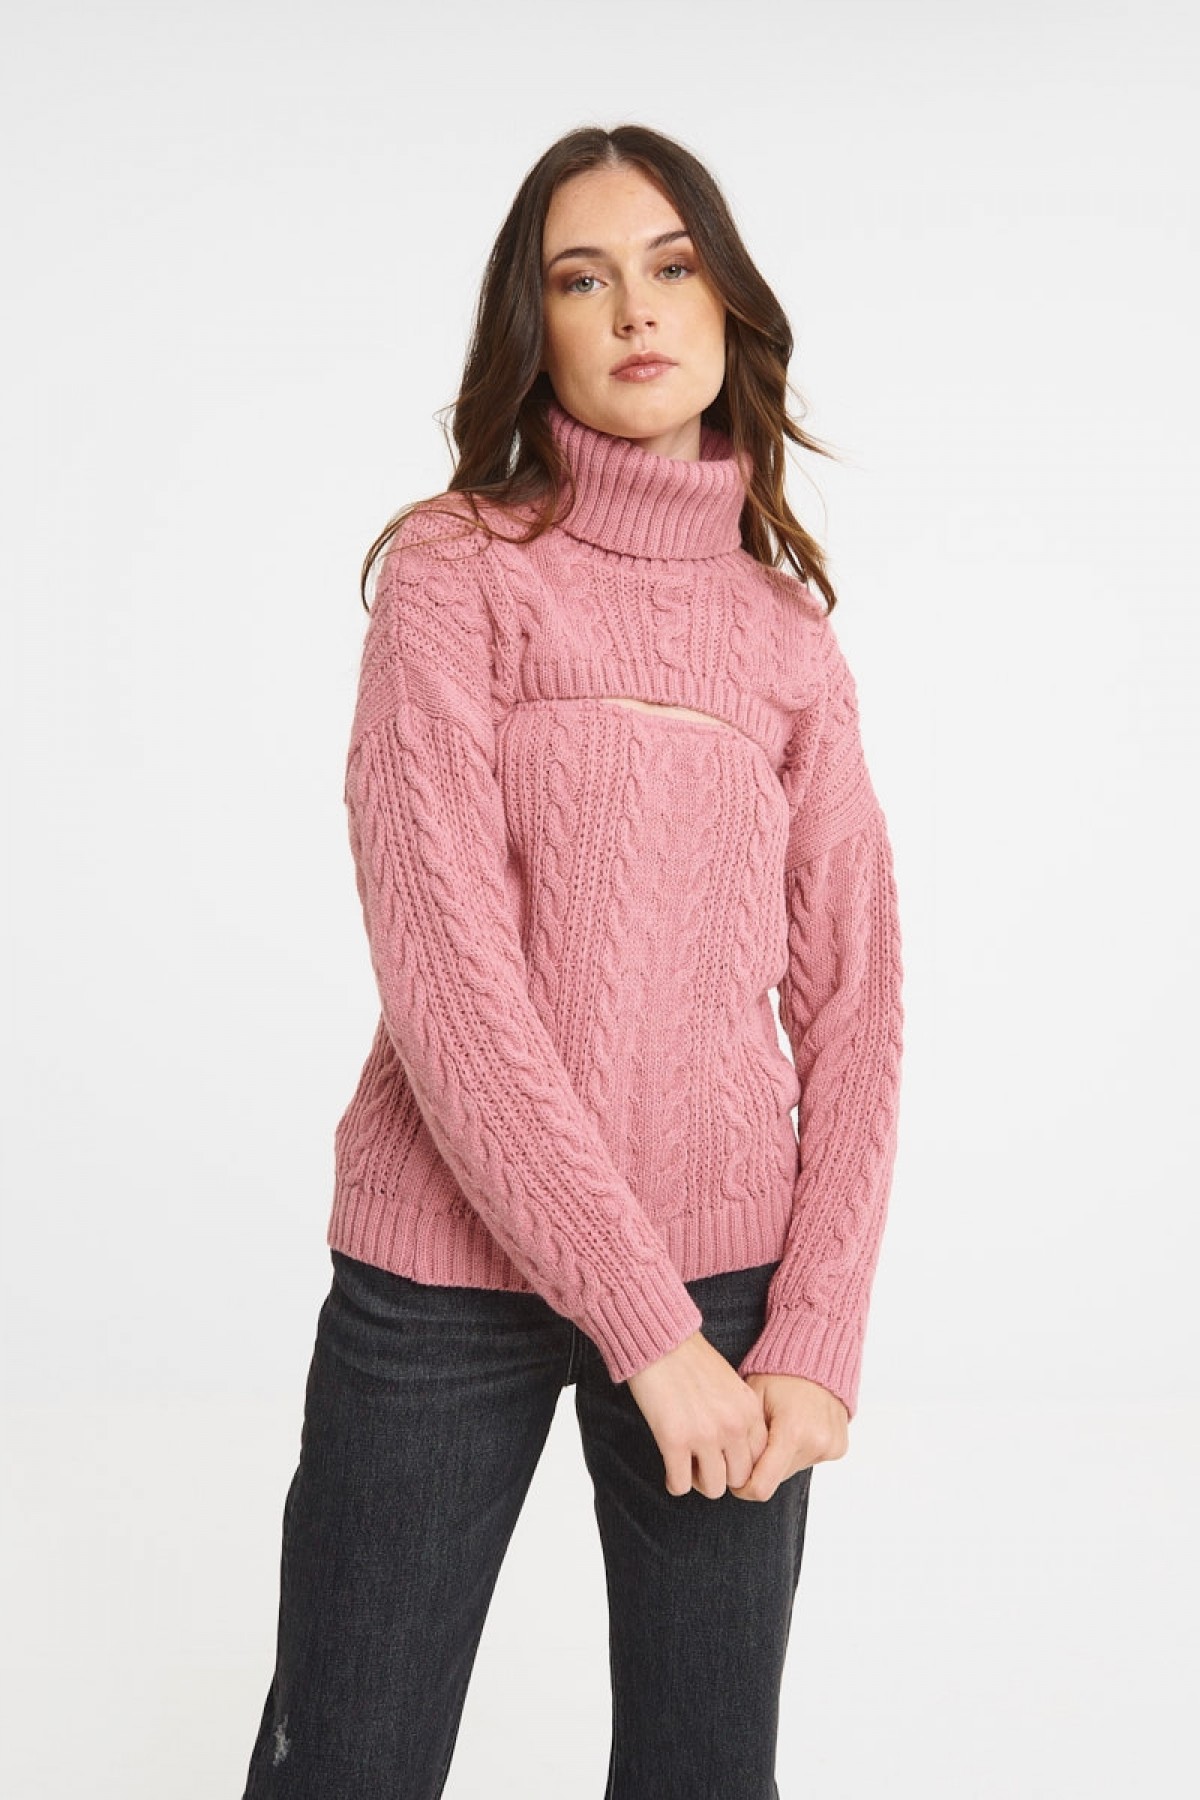 CHRISTELLE NIMA DOUBLE LANA WOOL CABLE BLOUSE IN PINK